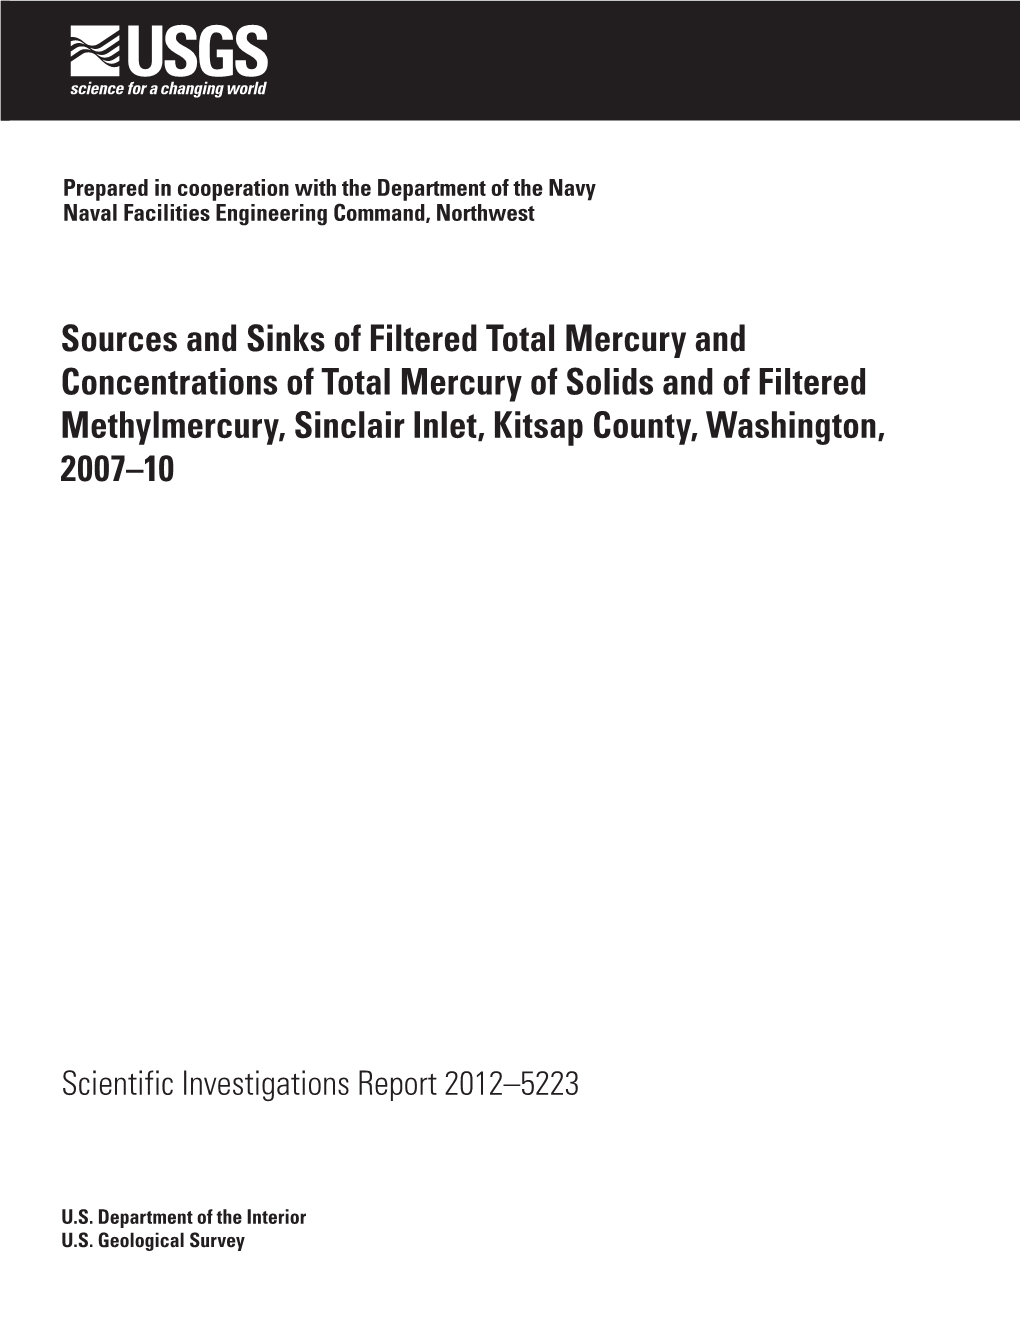 Sources and Sinks of Filtered Total Mercury and Concentrations Of